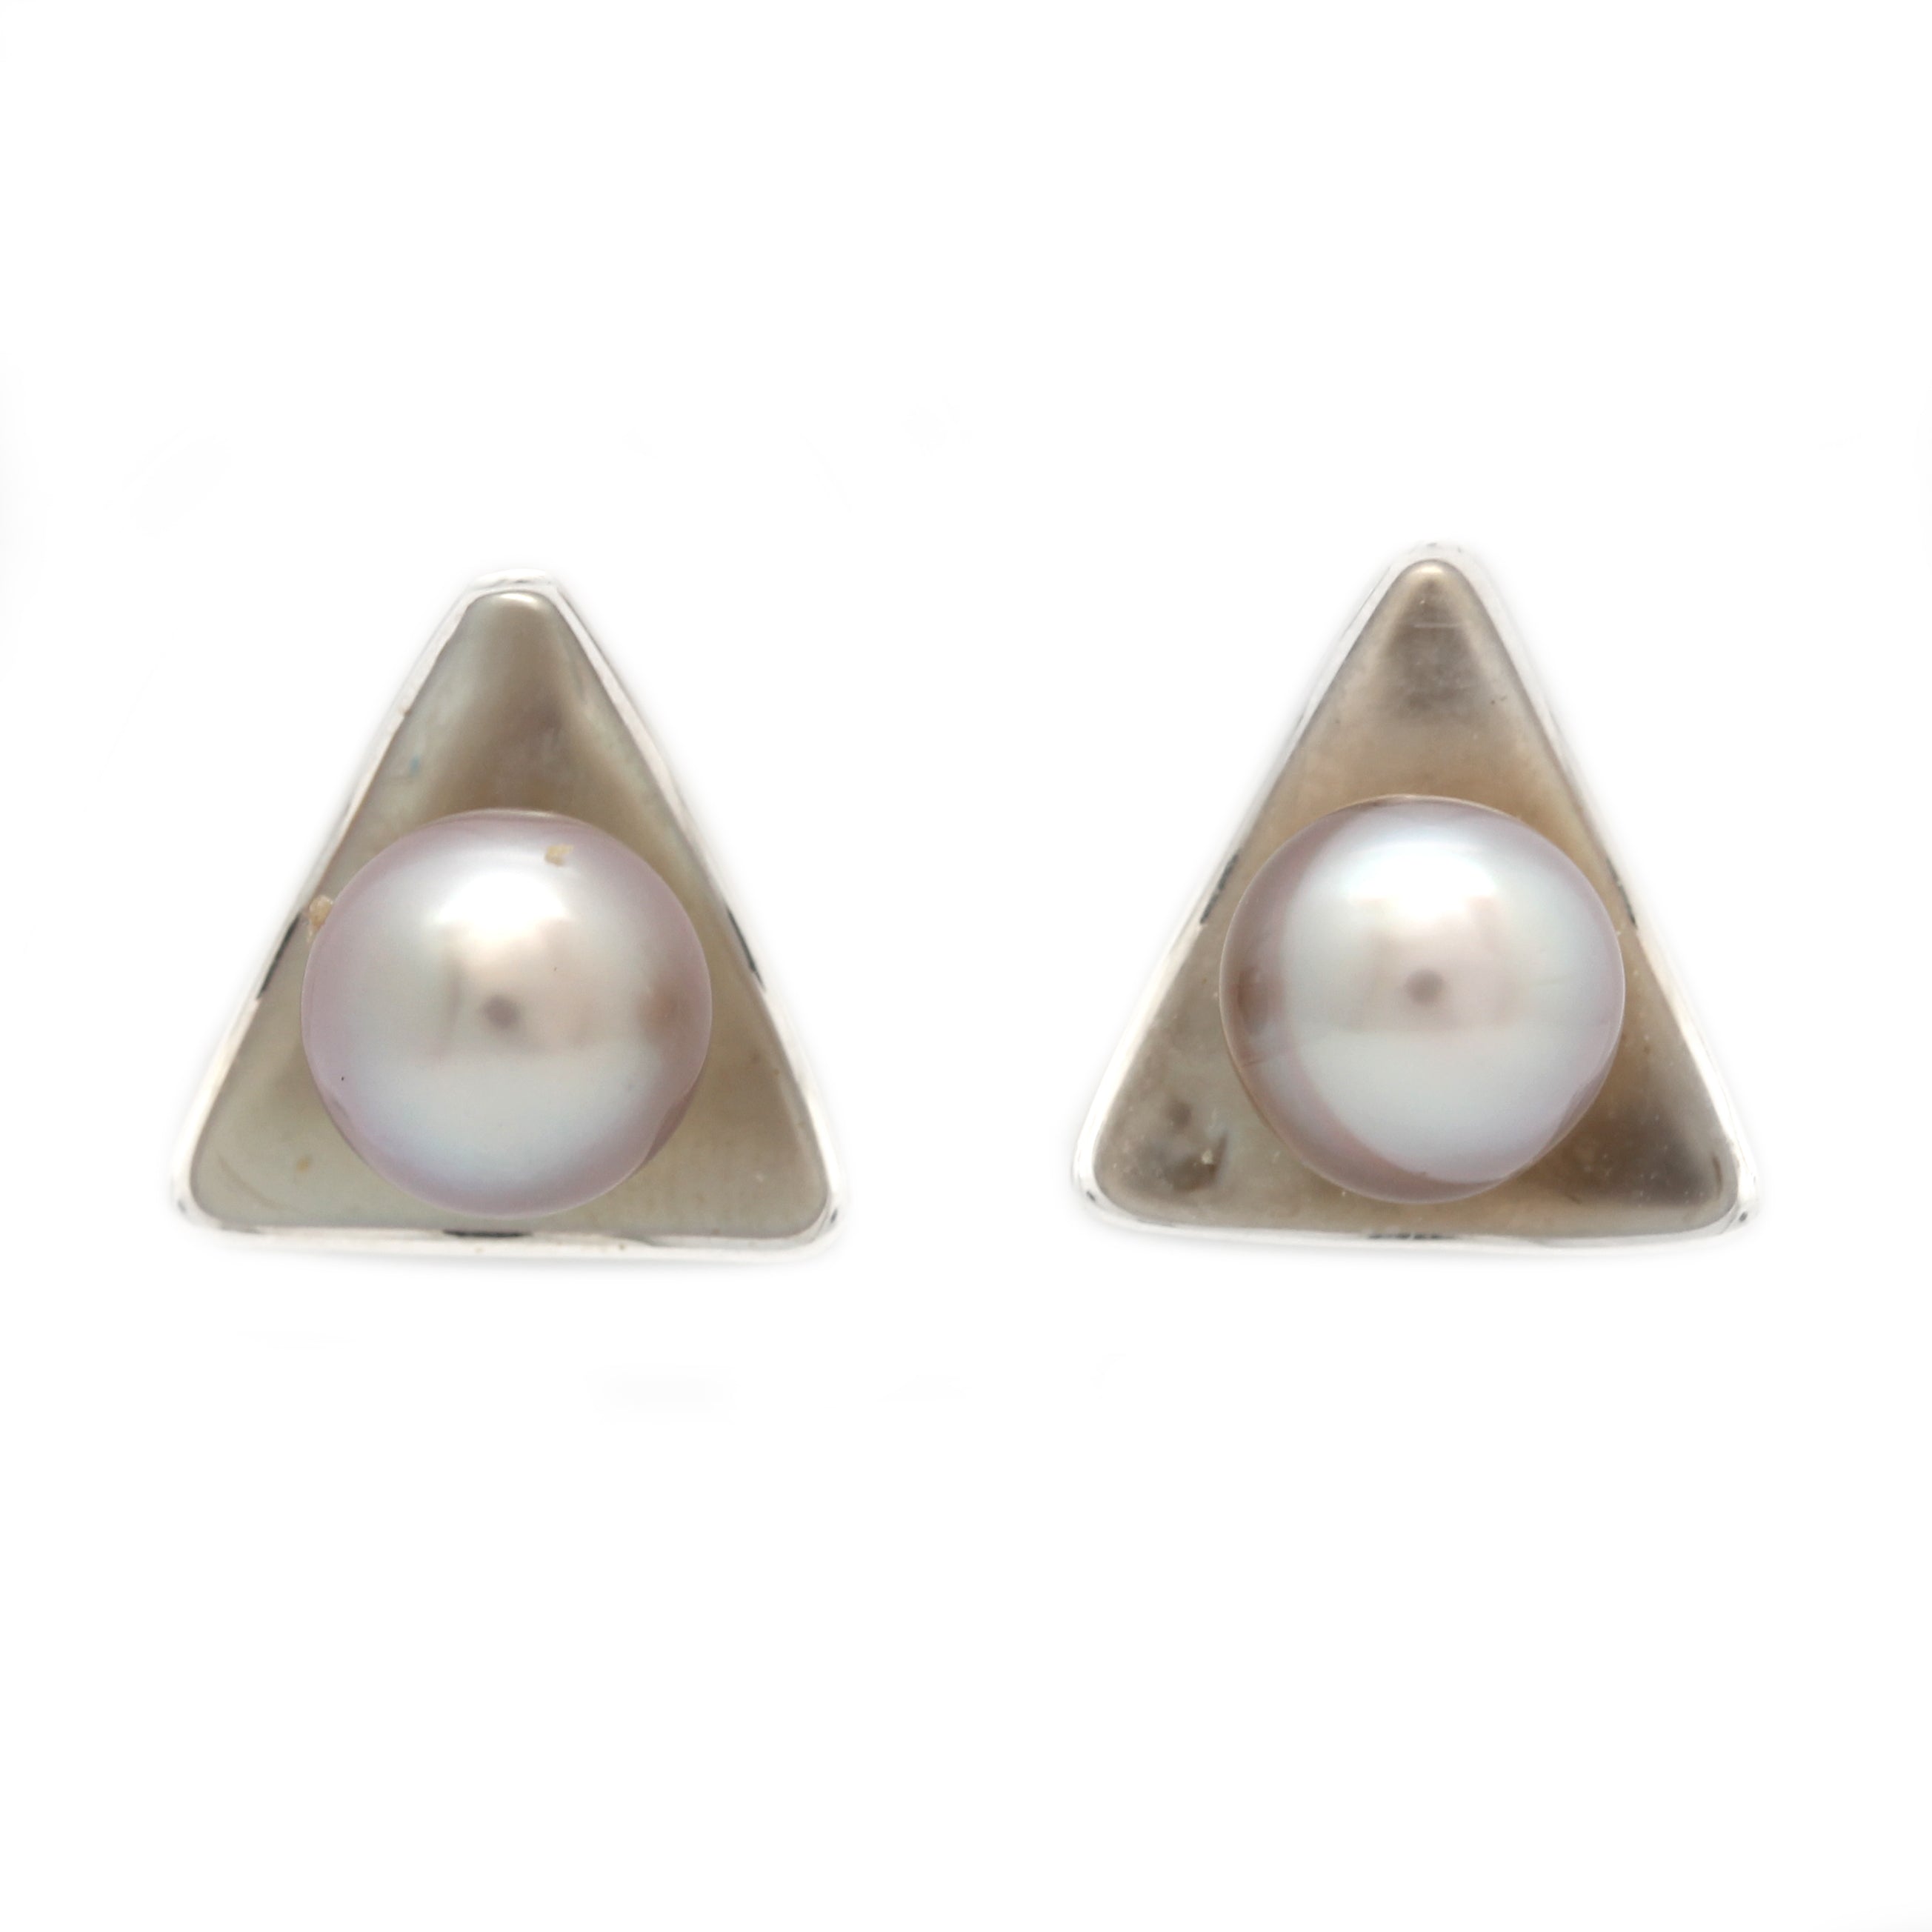 Silver Earrings with Cortez Pearls